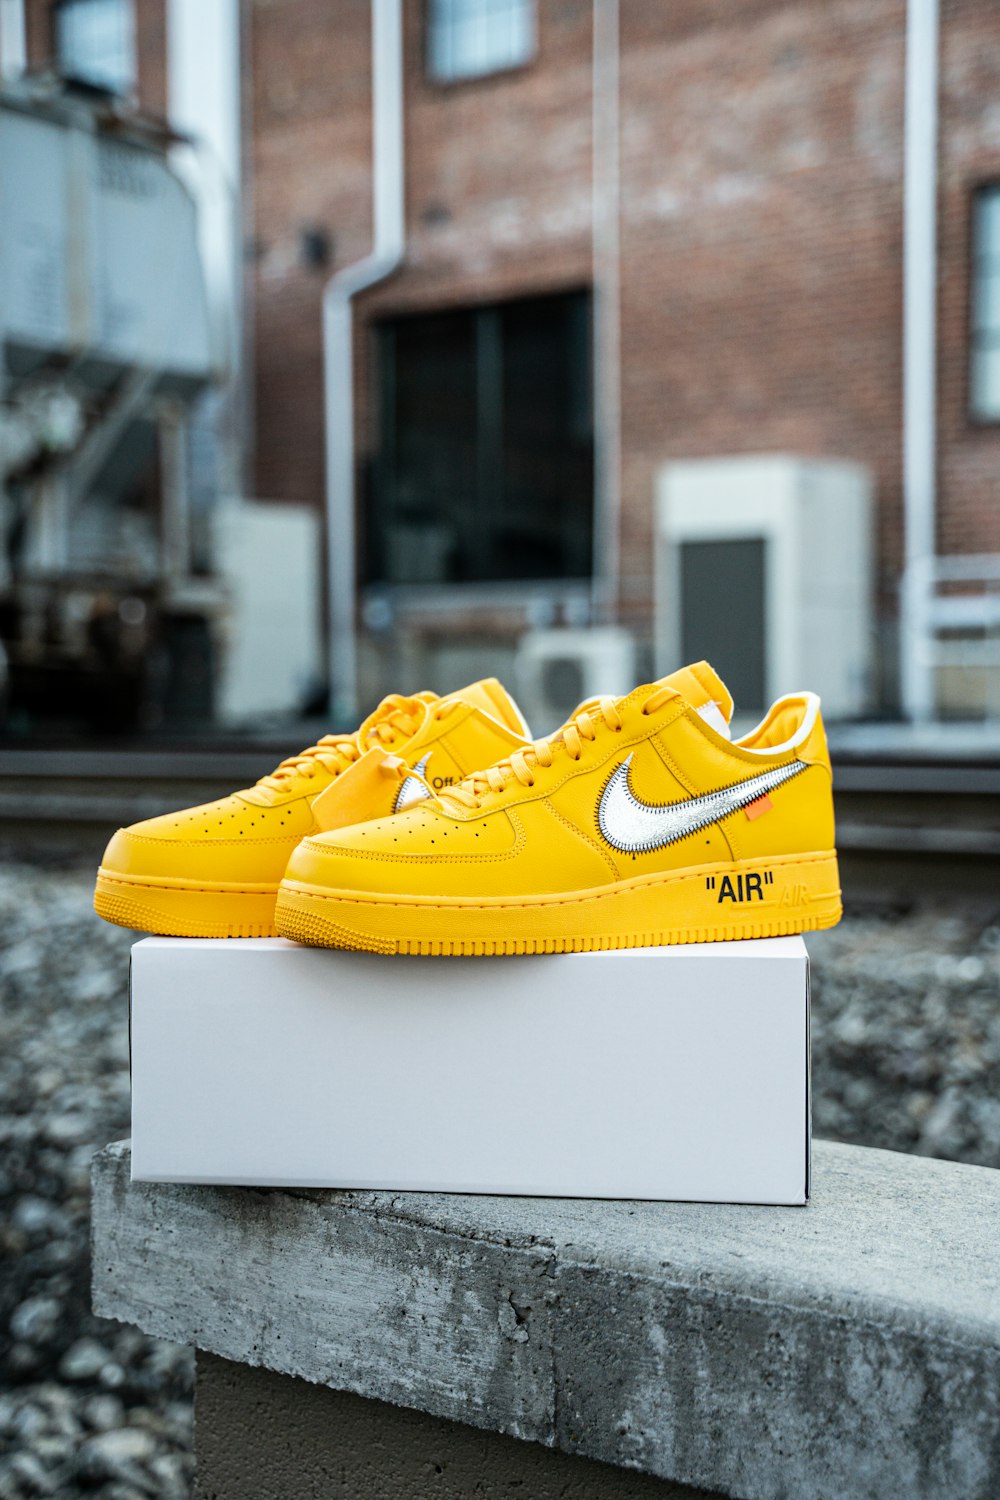 Nike Air Force 1 Pictures | Download Images on Unsplash